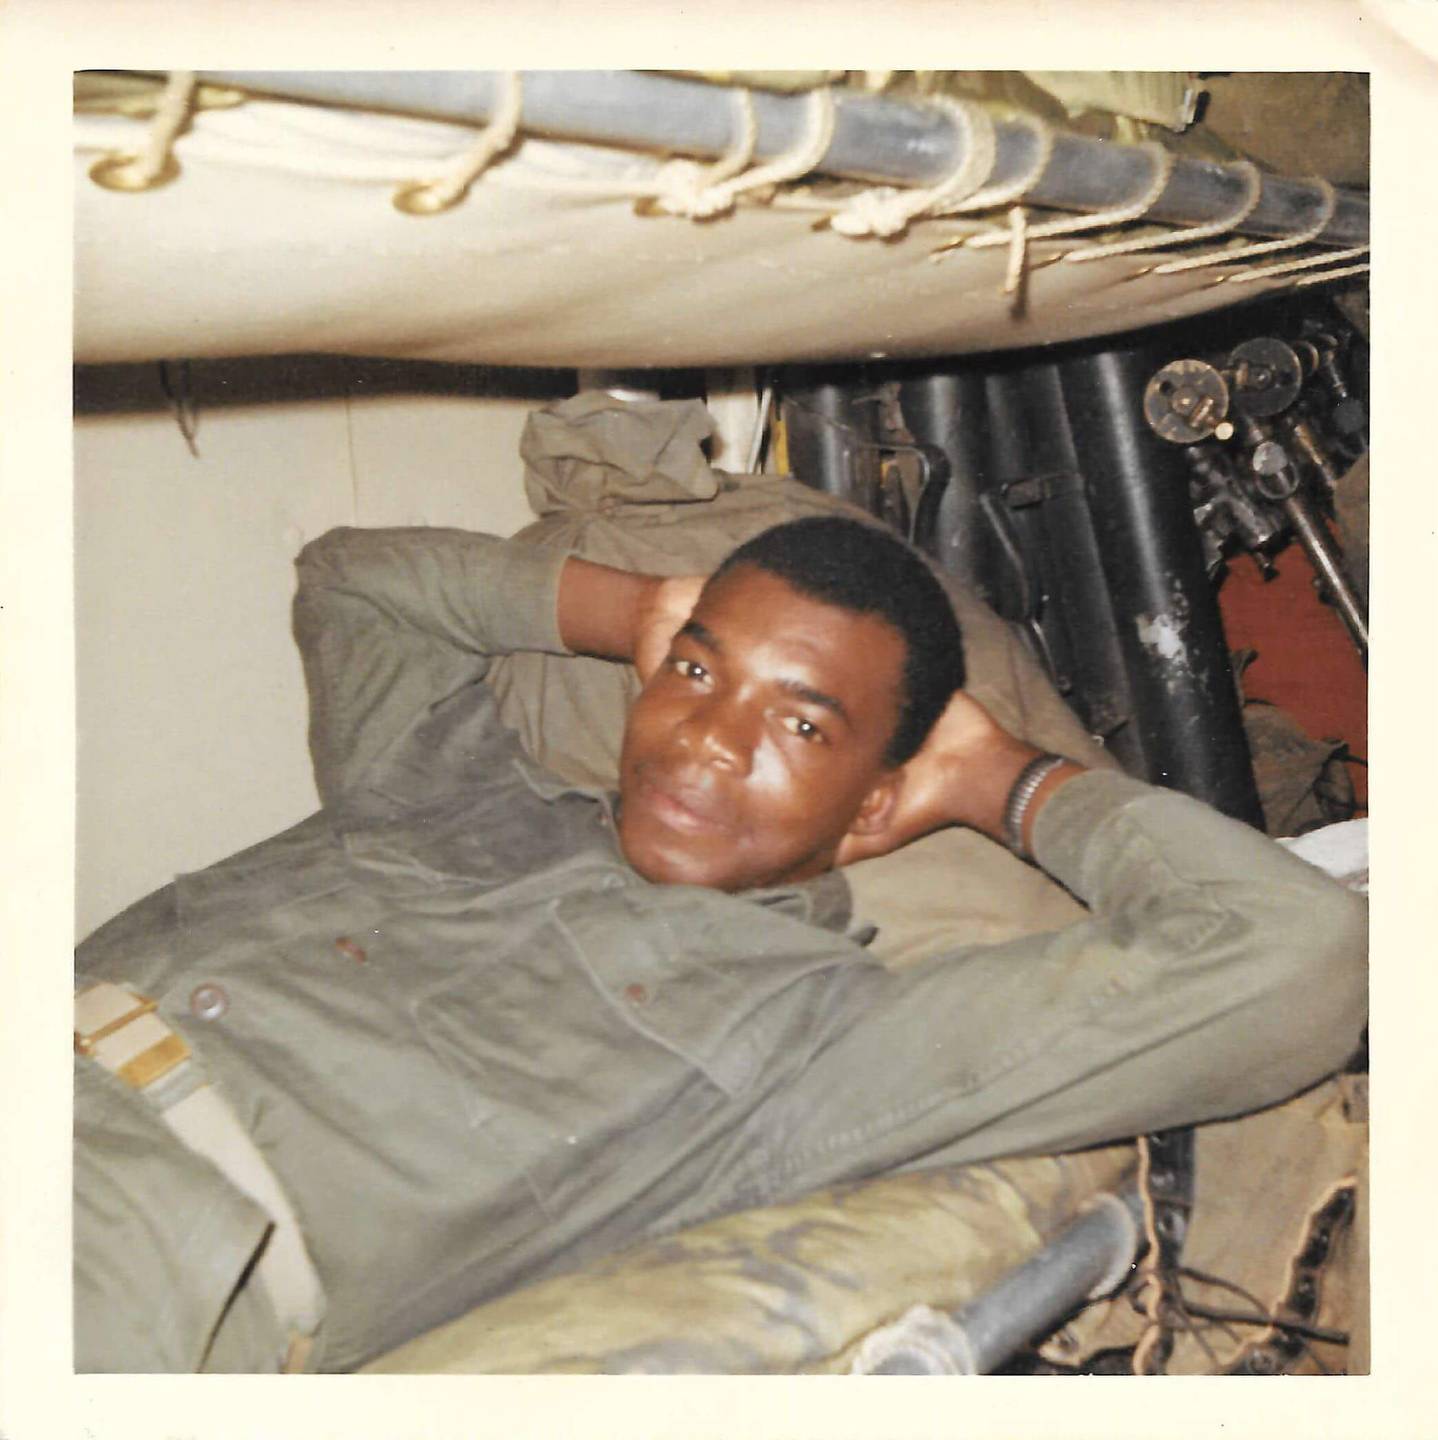 A young soldier relaxes on his back in his barrack bunk, hands behind his head.